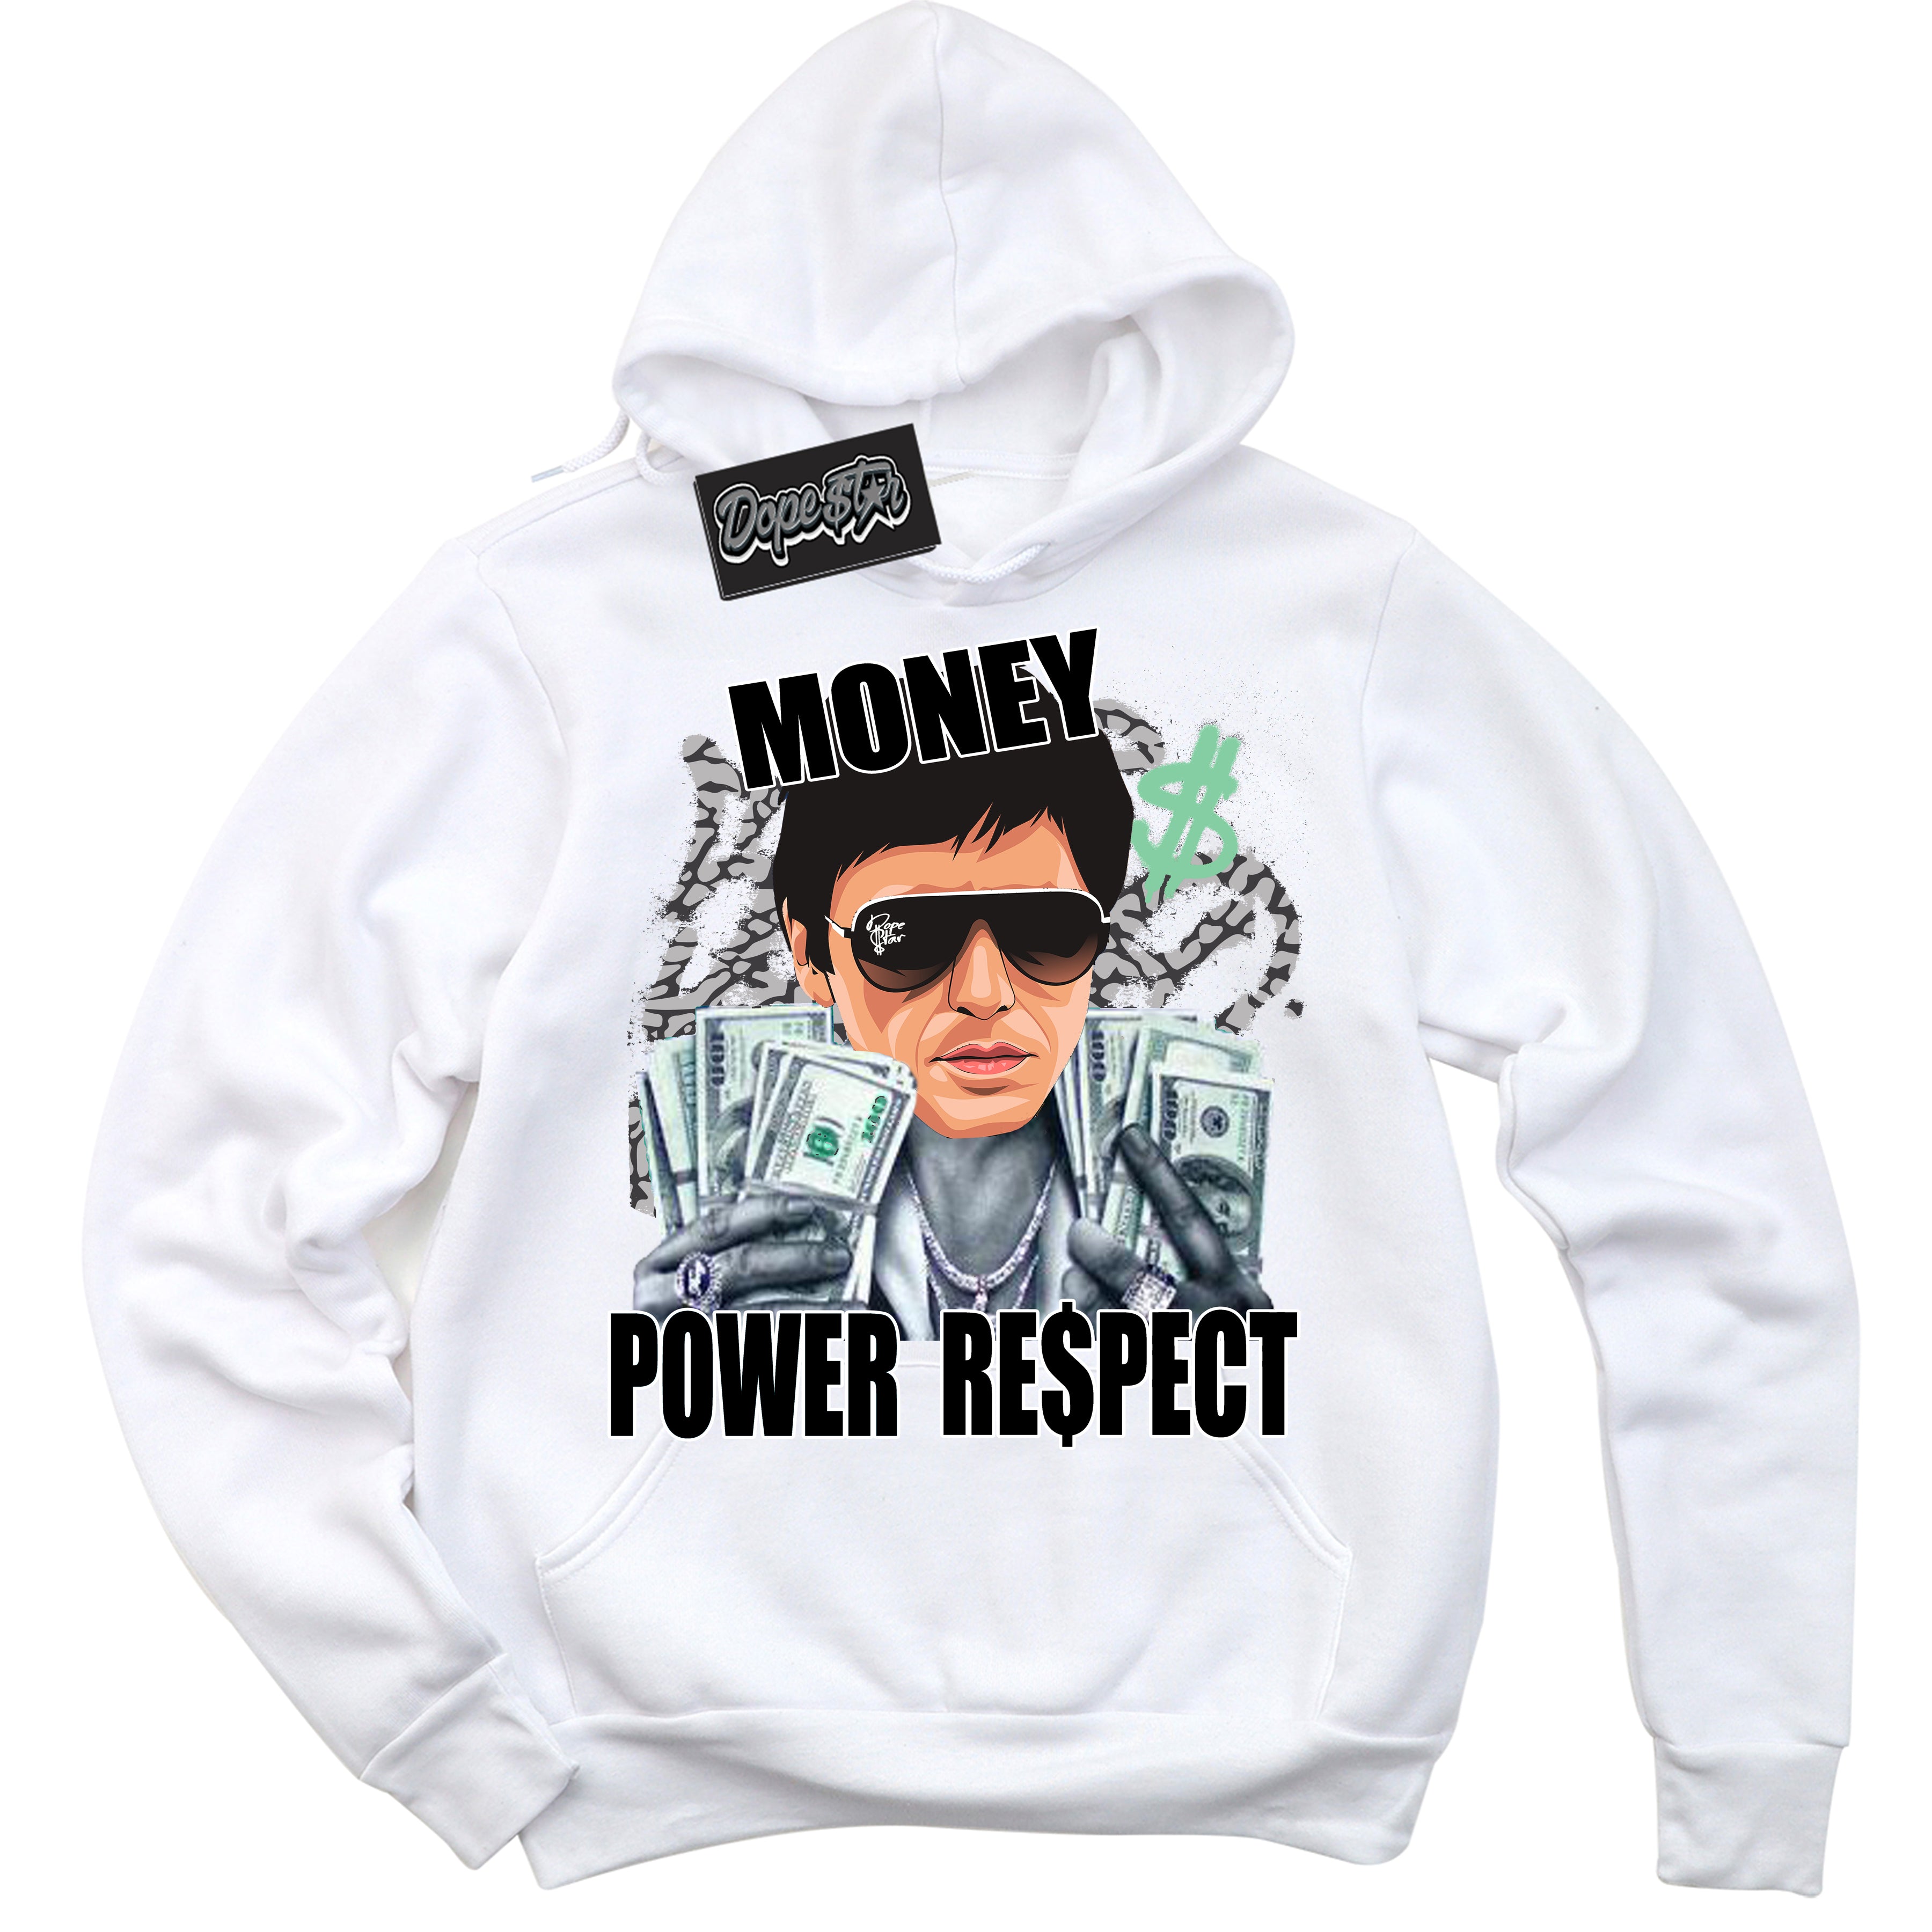 Cool White Graphic DopeStar Hoodie with “ Tony Montana “ print, that perfectly matches Green Glow 3s sneakers